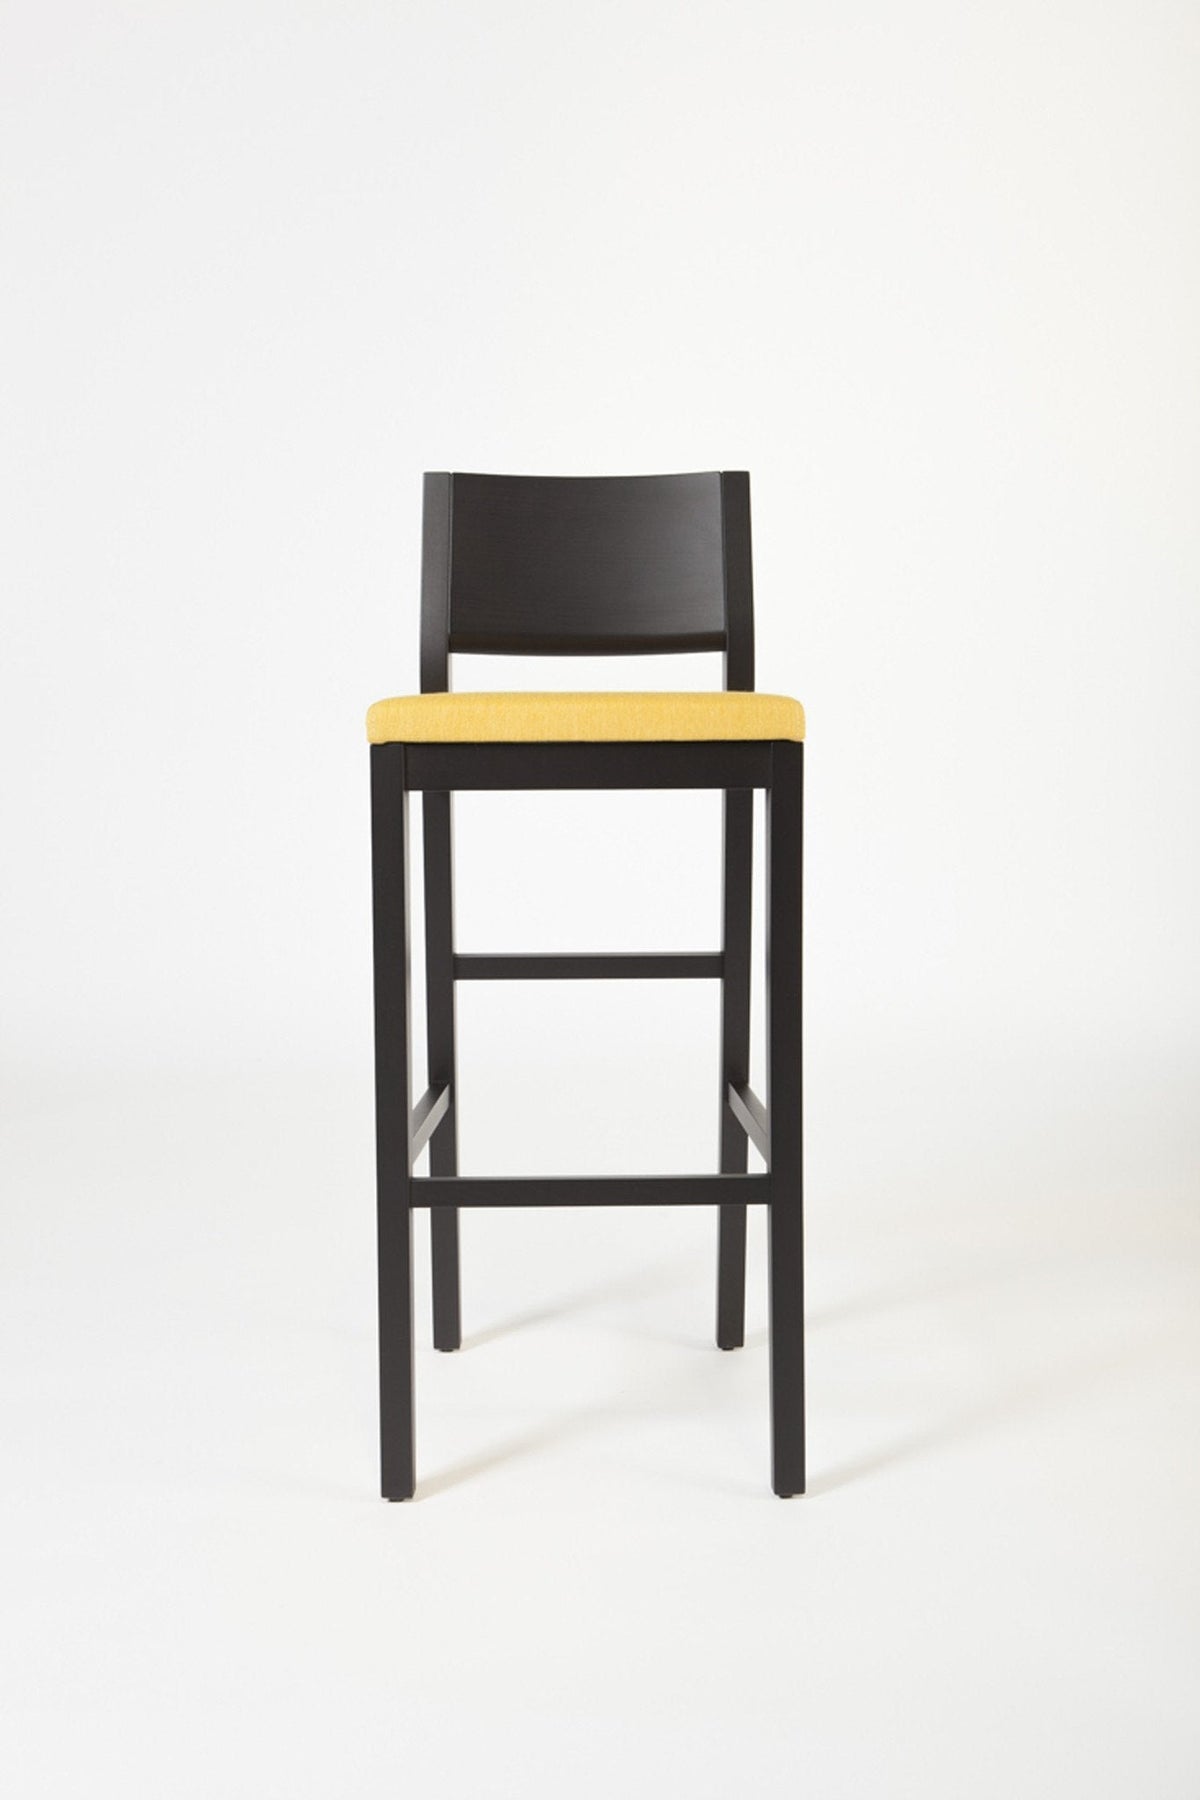 Amarcord High Stool-Livoni-Contract Furniture Store